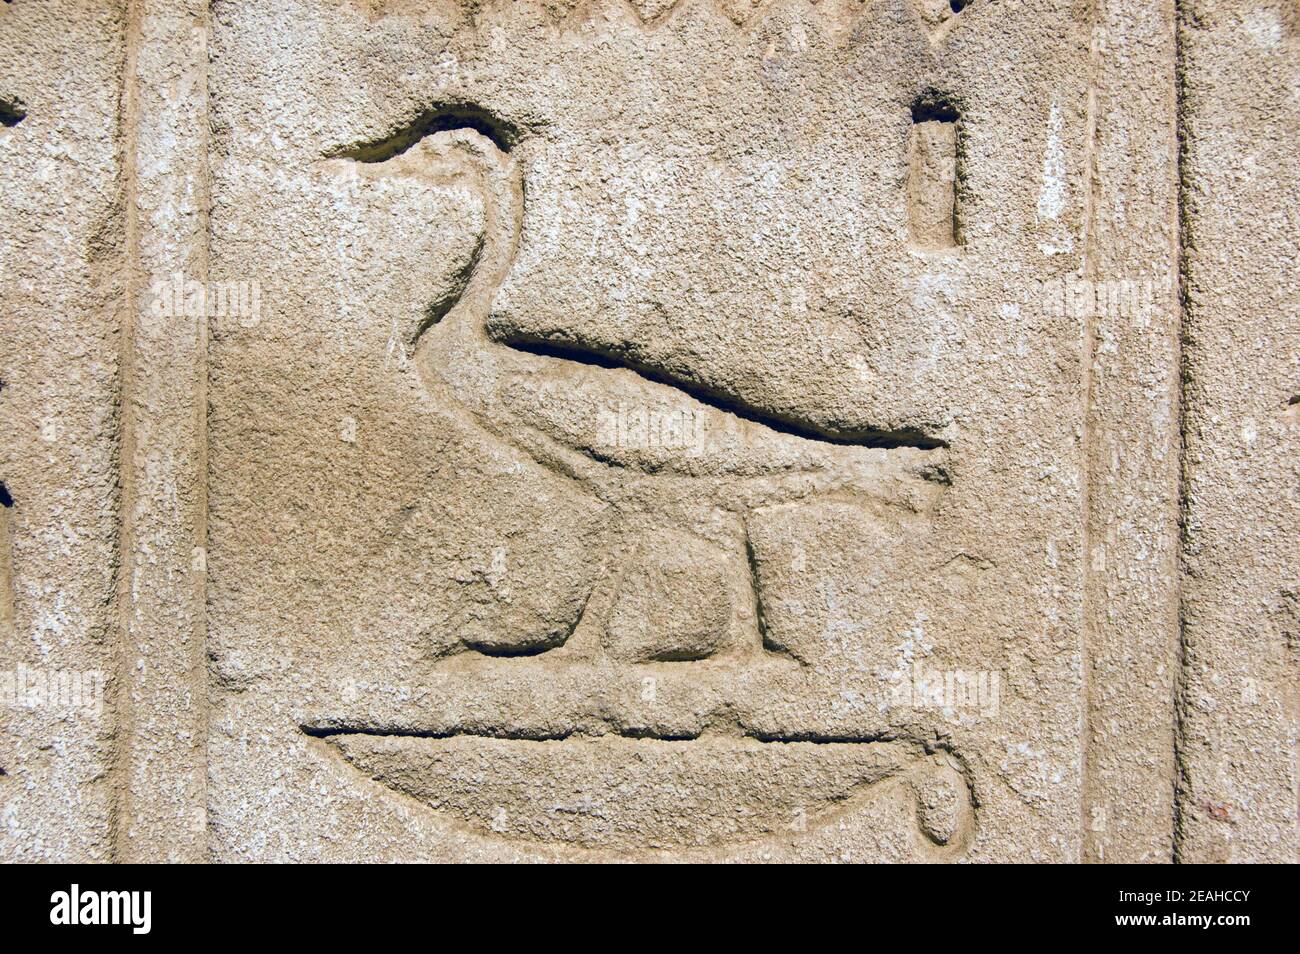 ancient-egyptian-hieroglyphic-carving-of-a-duck-temple-of-horus-at-edfu-egypt-2EAHCCY.jpg